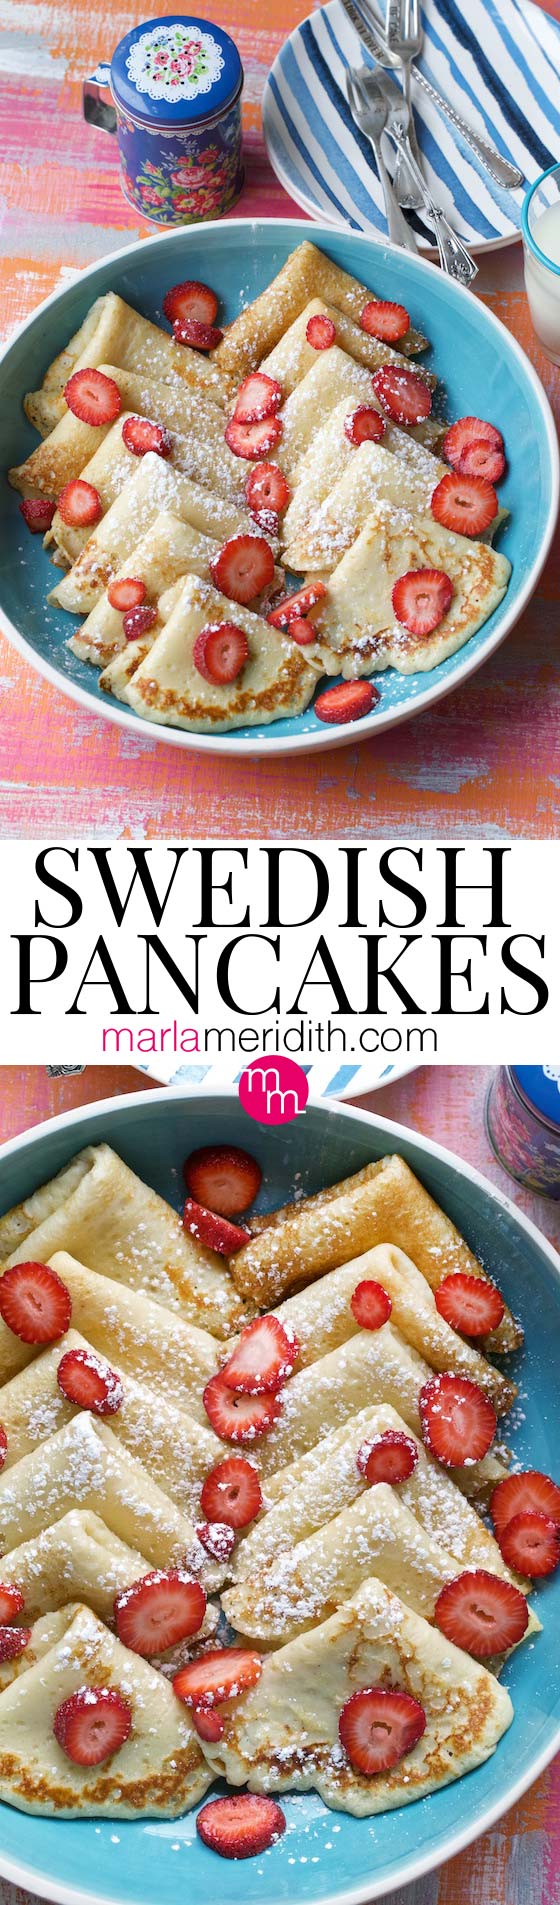 Swedish Pancakes are so delicious! Get the simple recipe and make some today! MarlaMeridith.com #recipe #pancakes